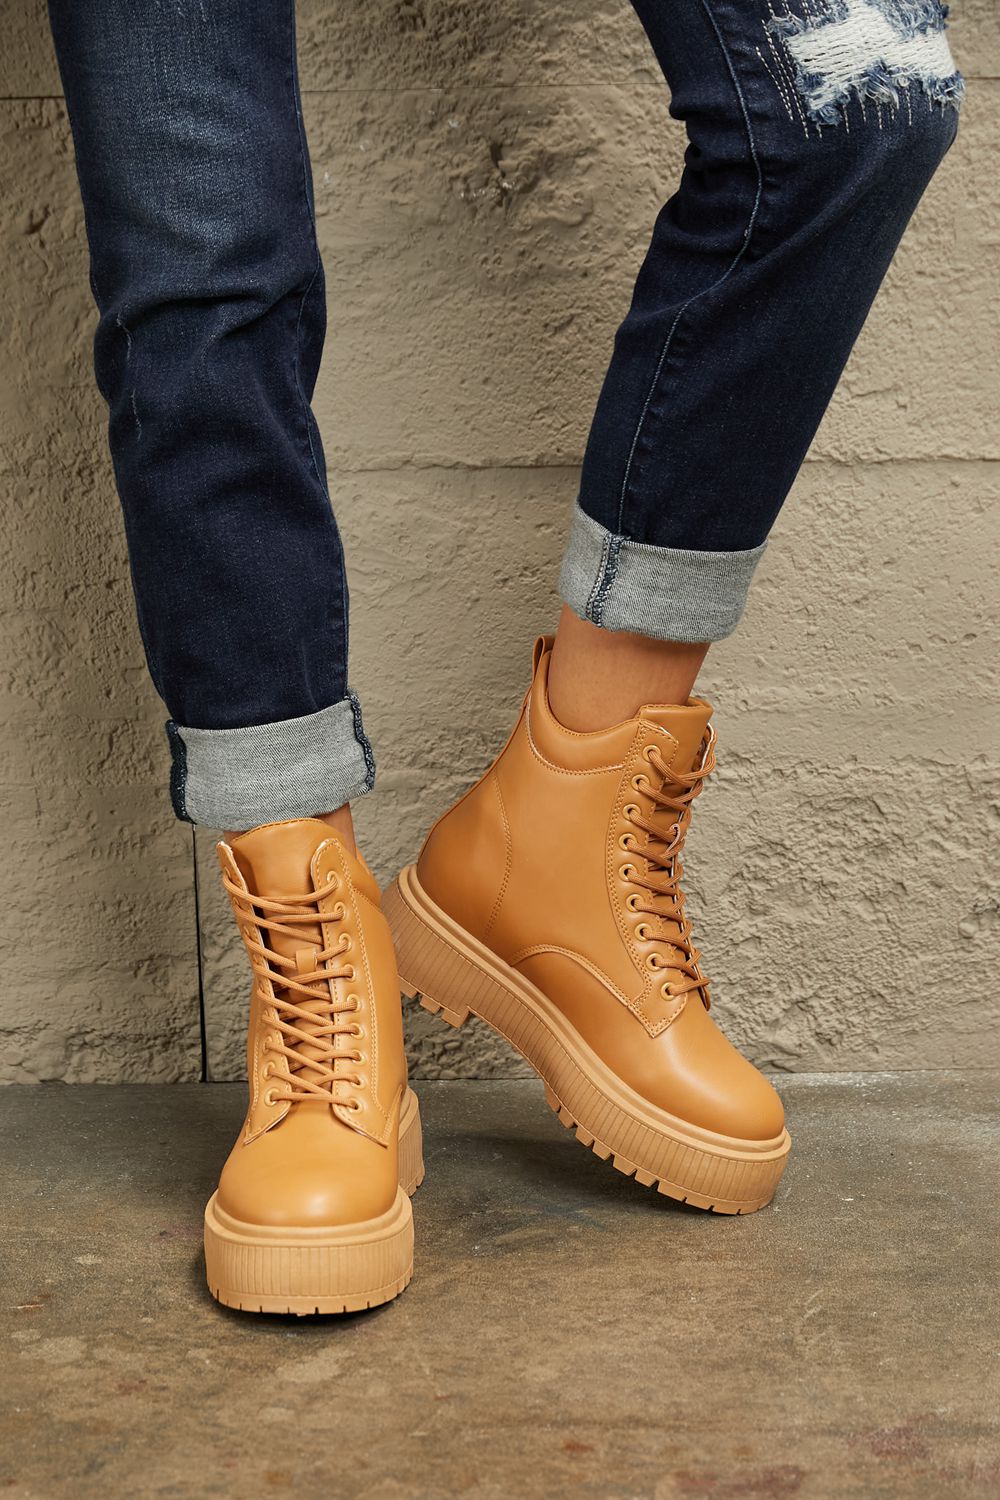 Chic Caramel Cityscape Boots